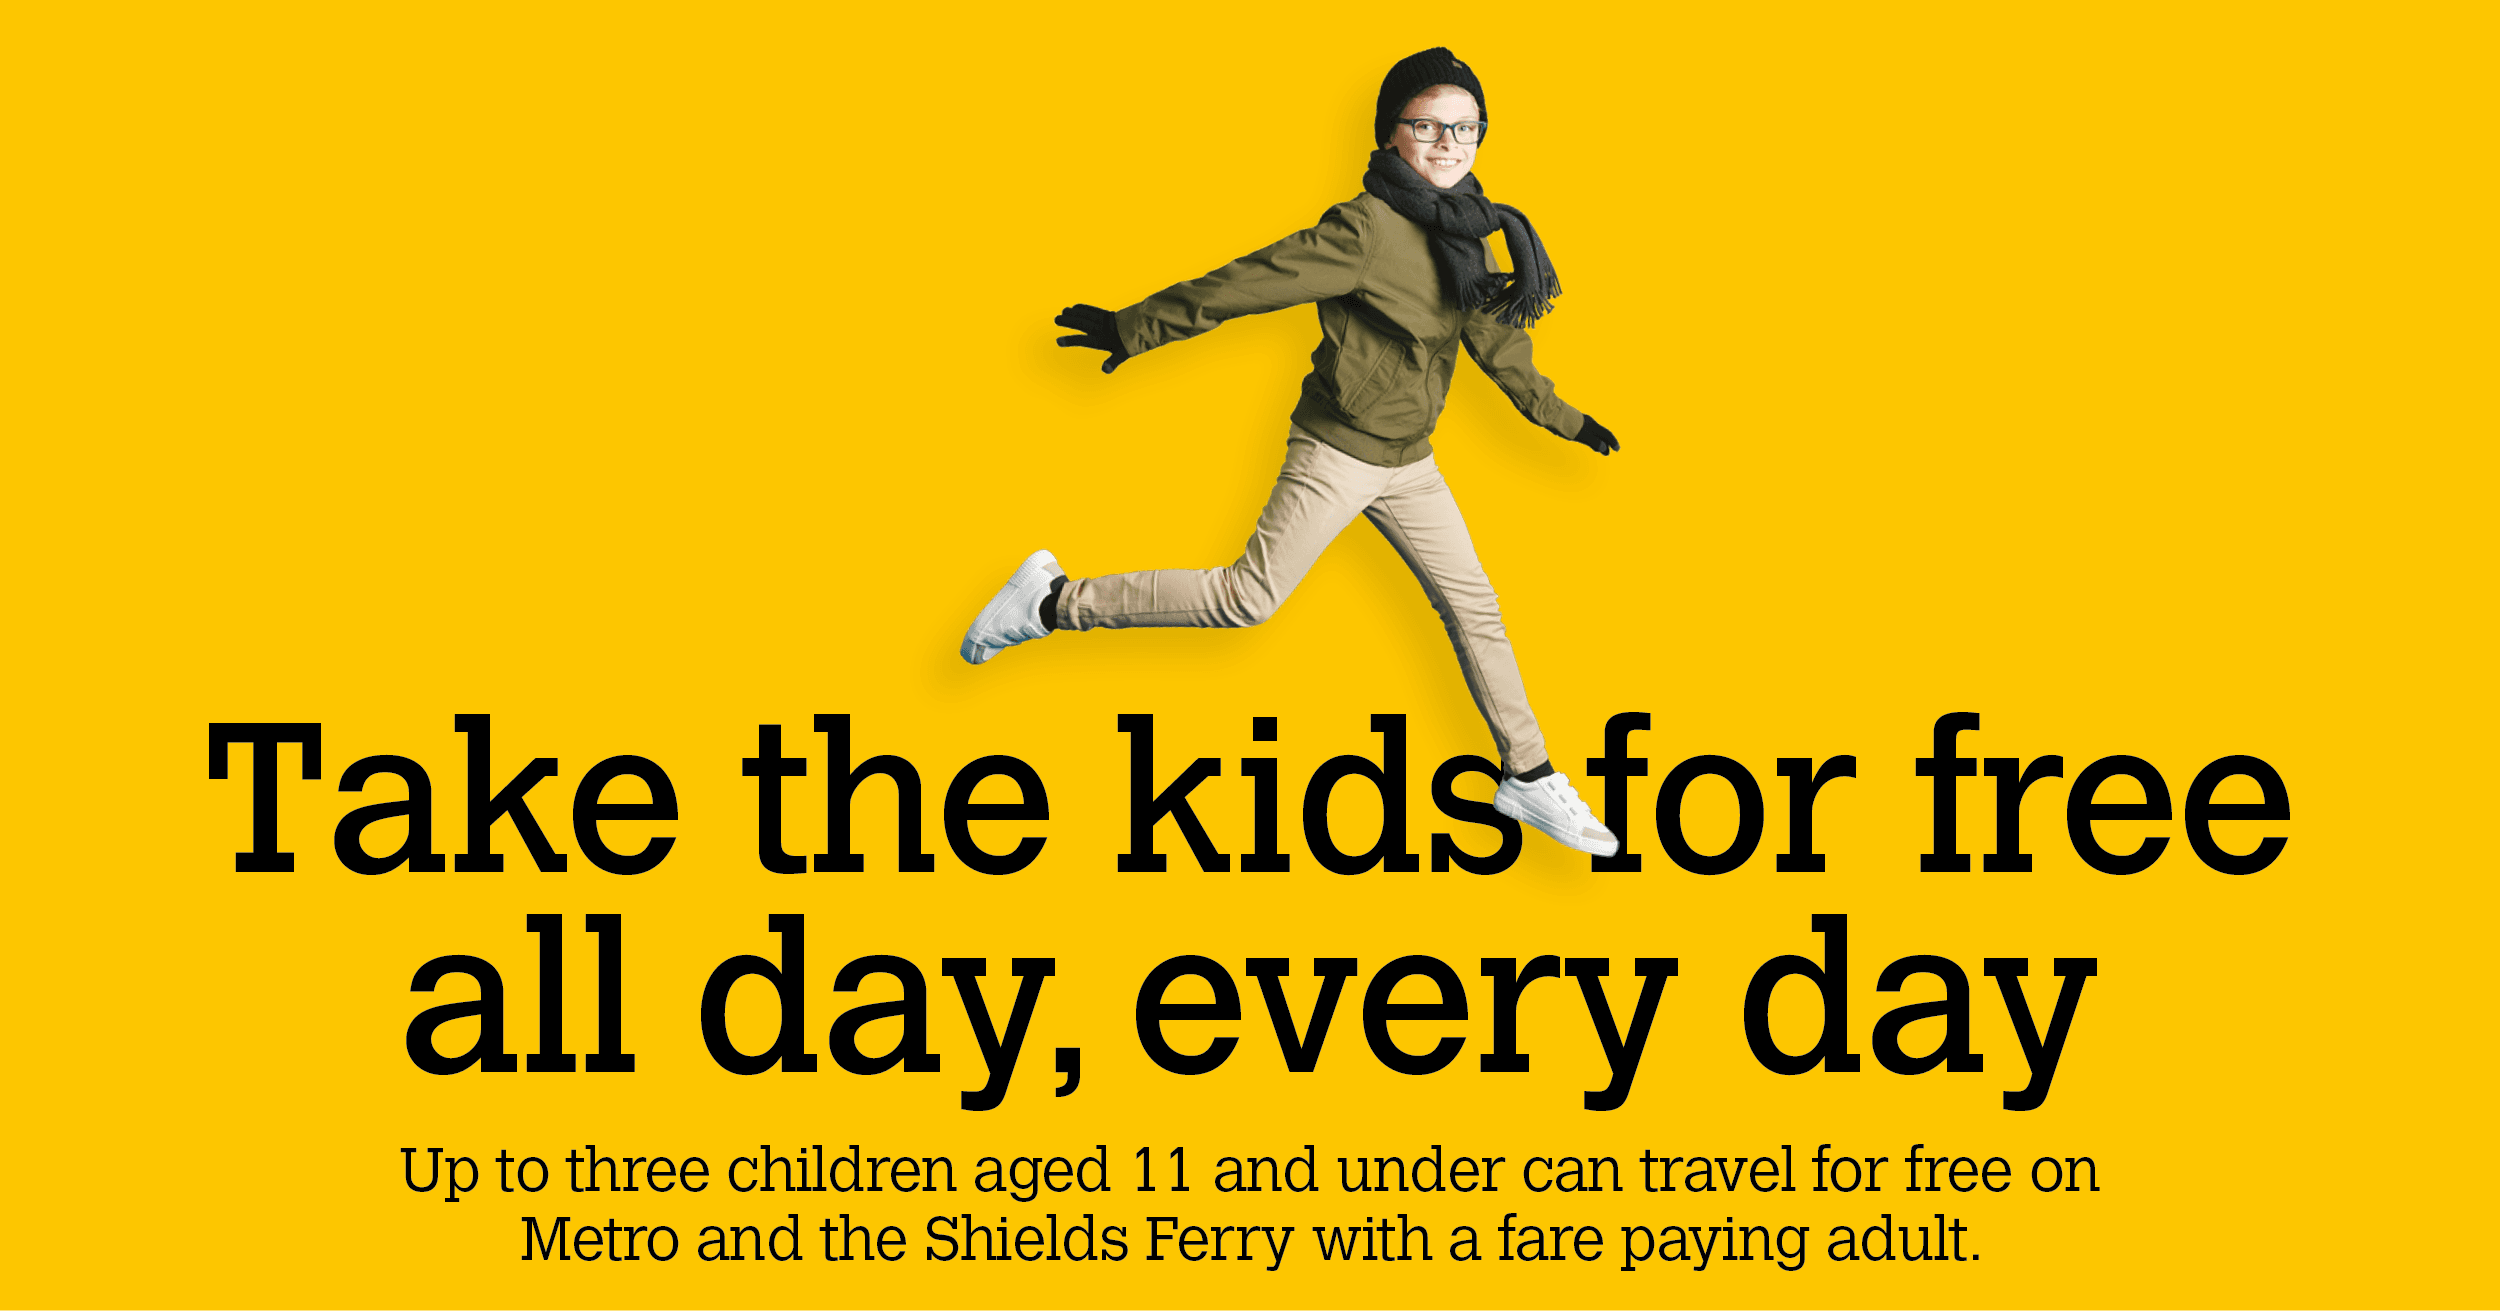 Take the kids for free all day, every day